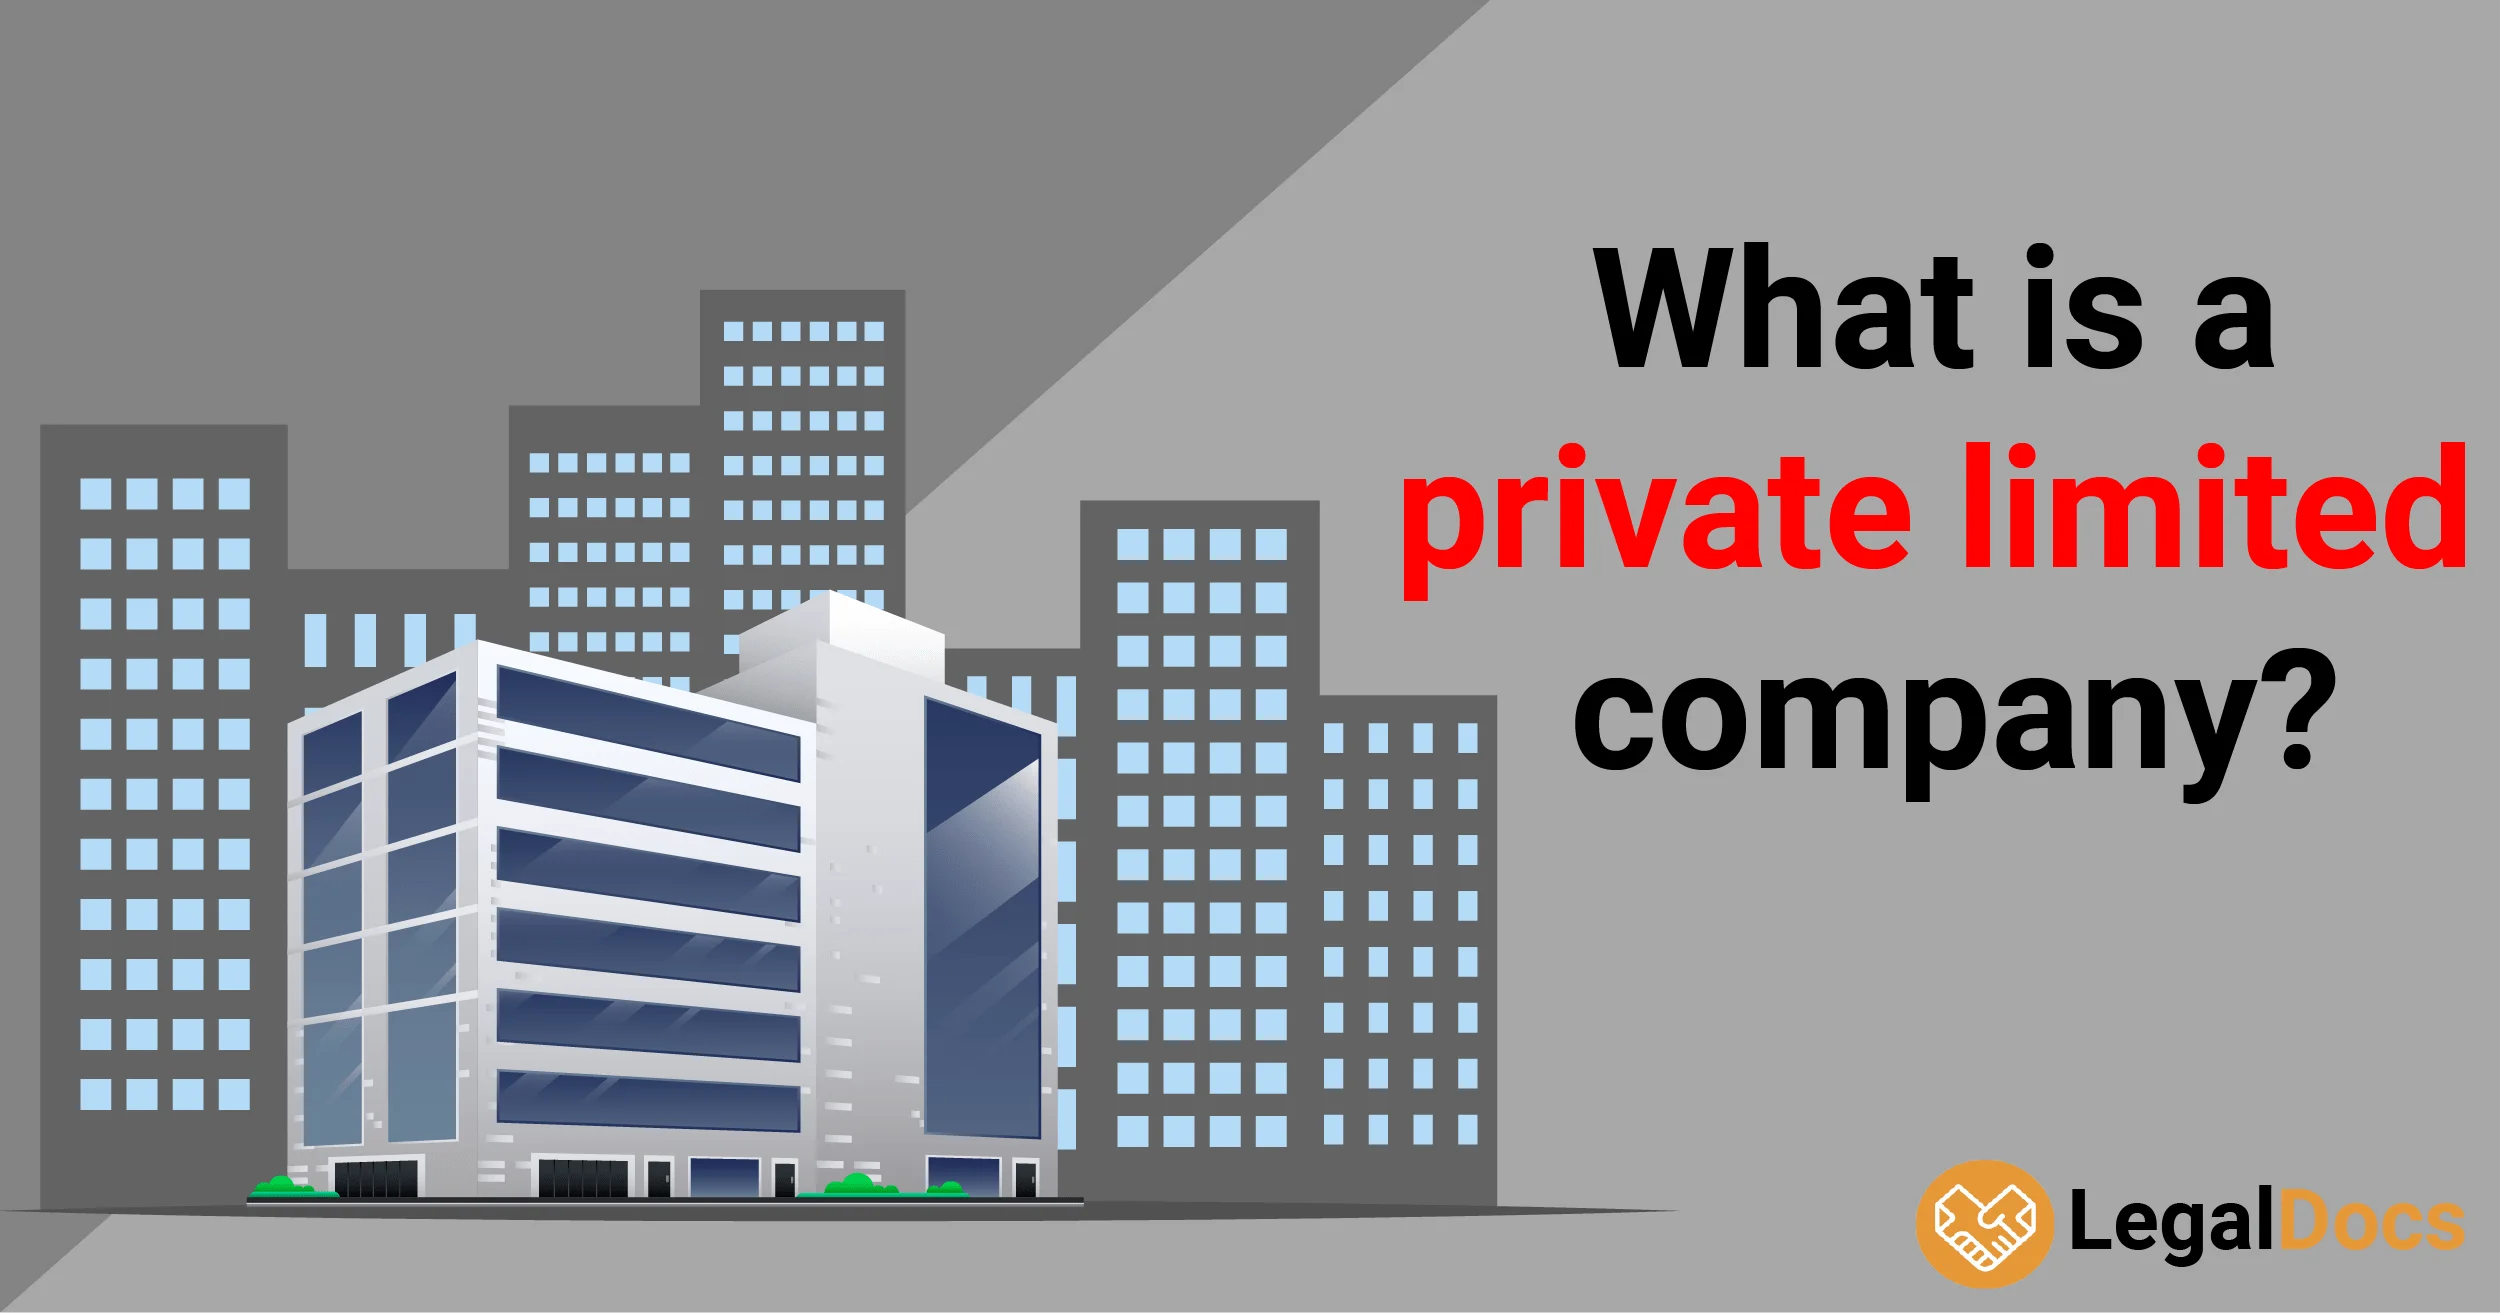 What is a Private Limited Company? - LegalDocs